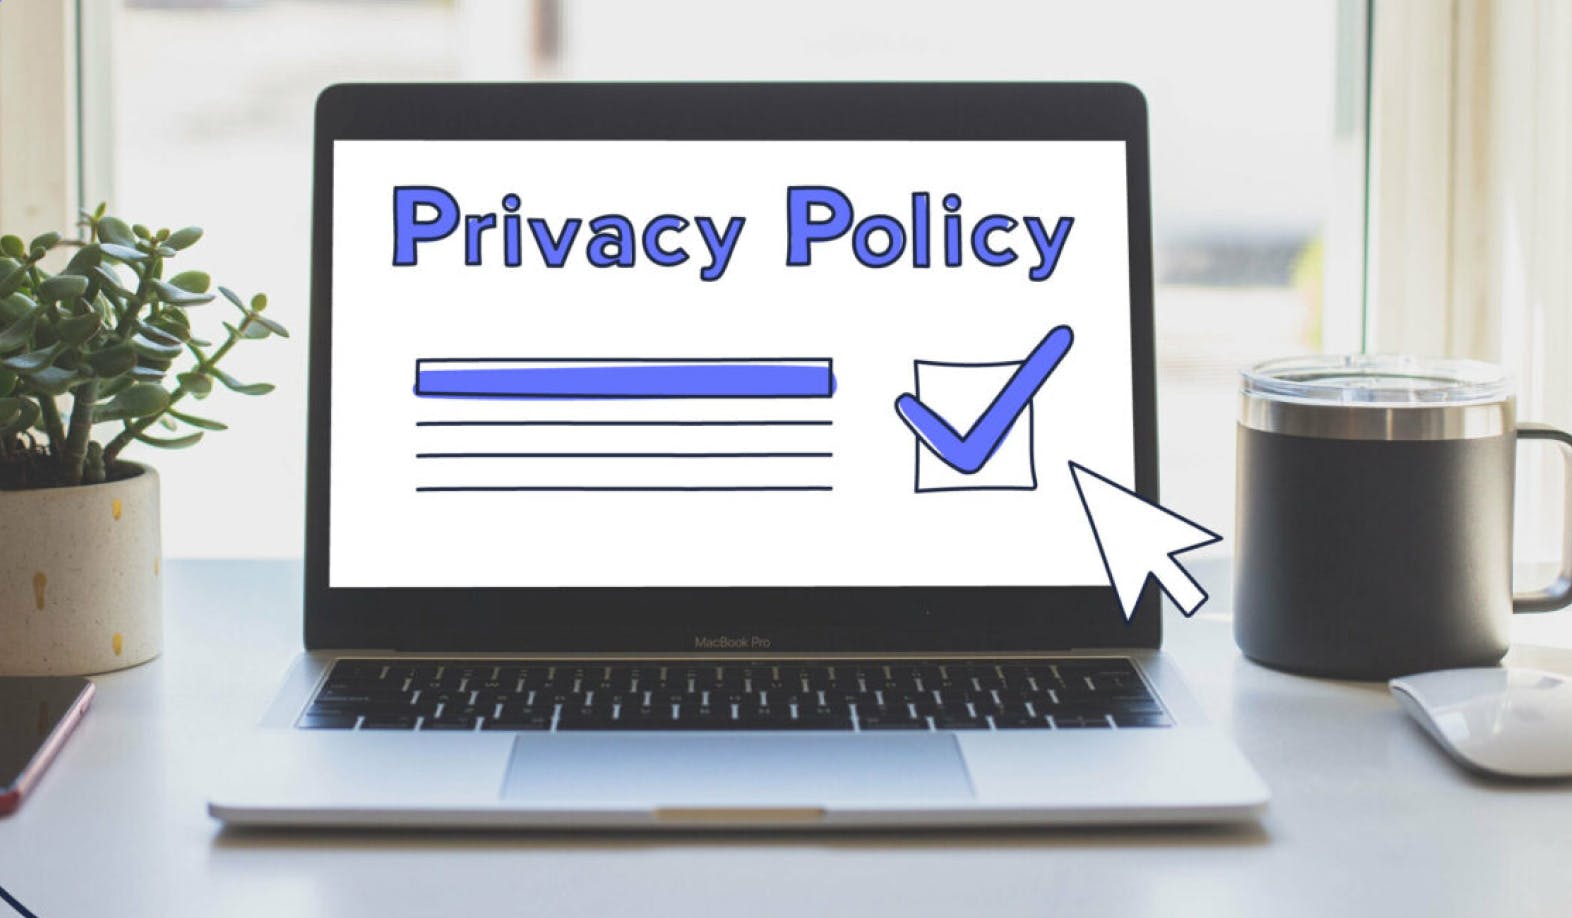 blogpost-image of a laptop displaying Privacy Policy and a checkmark